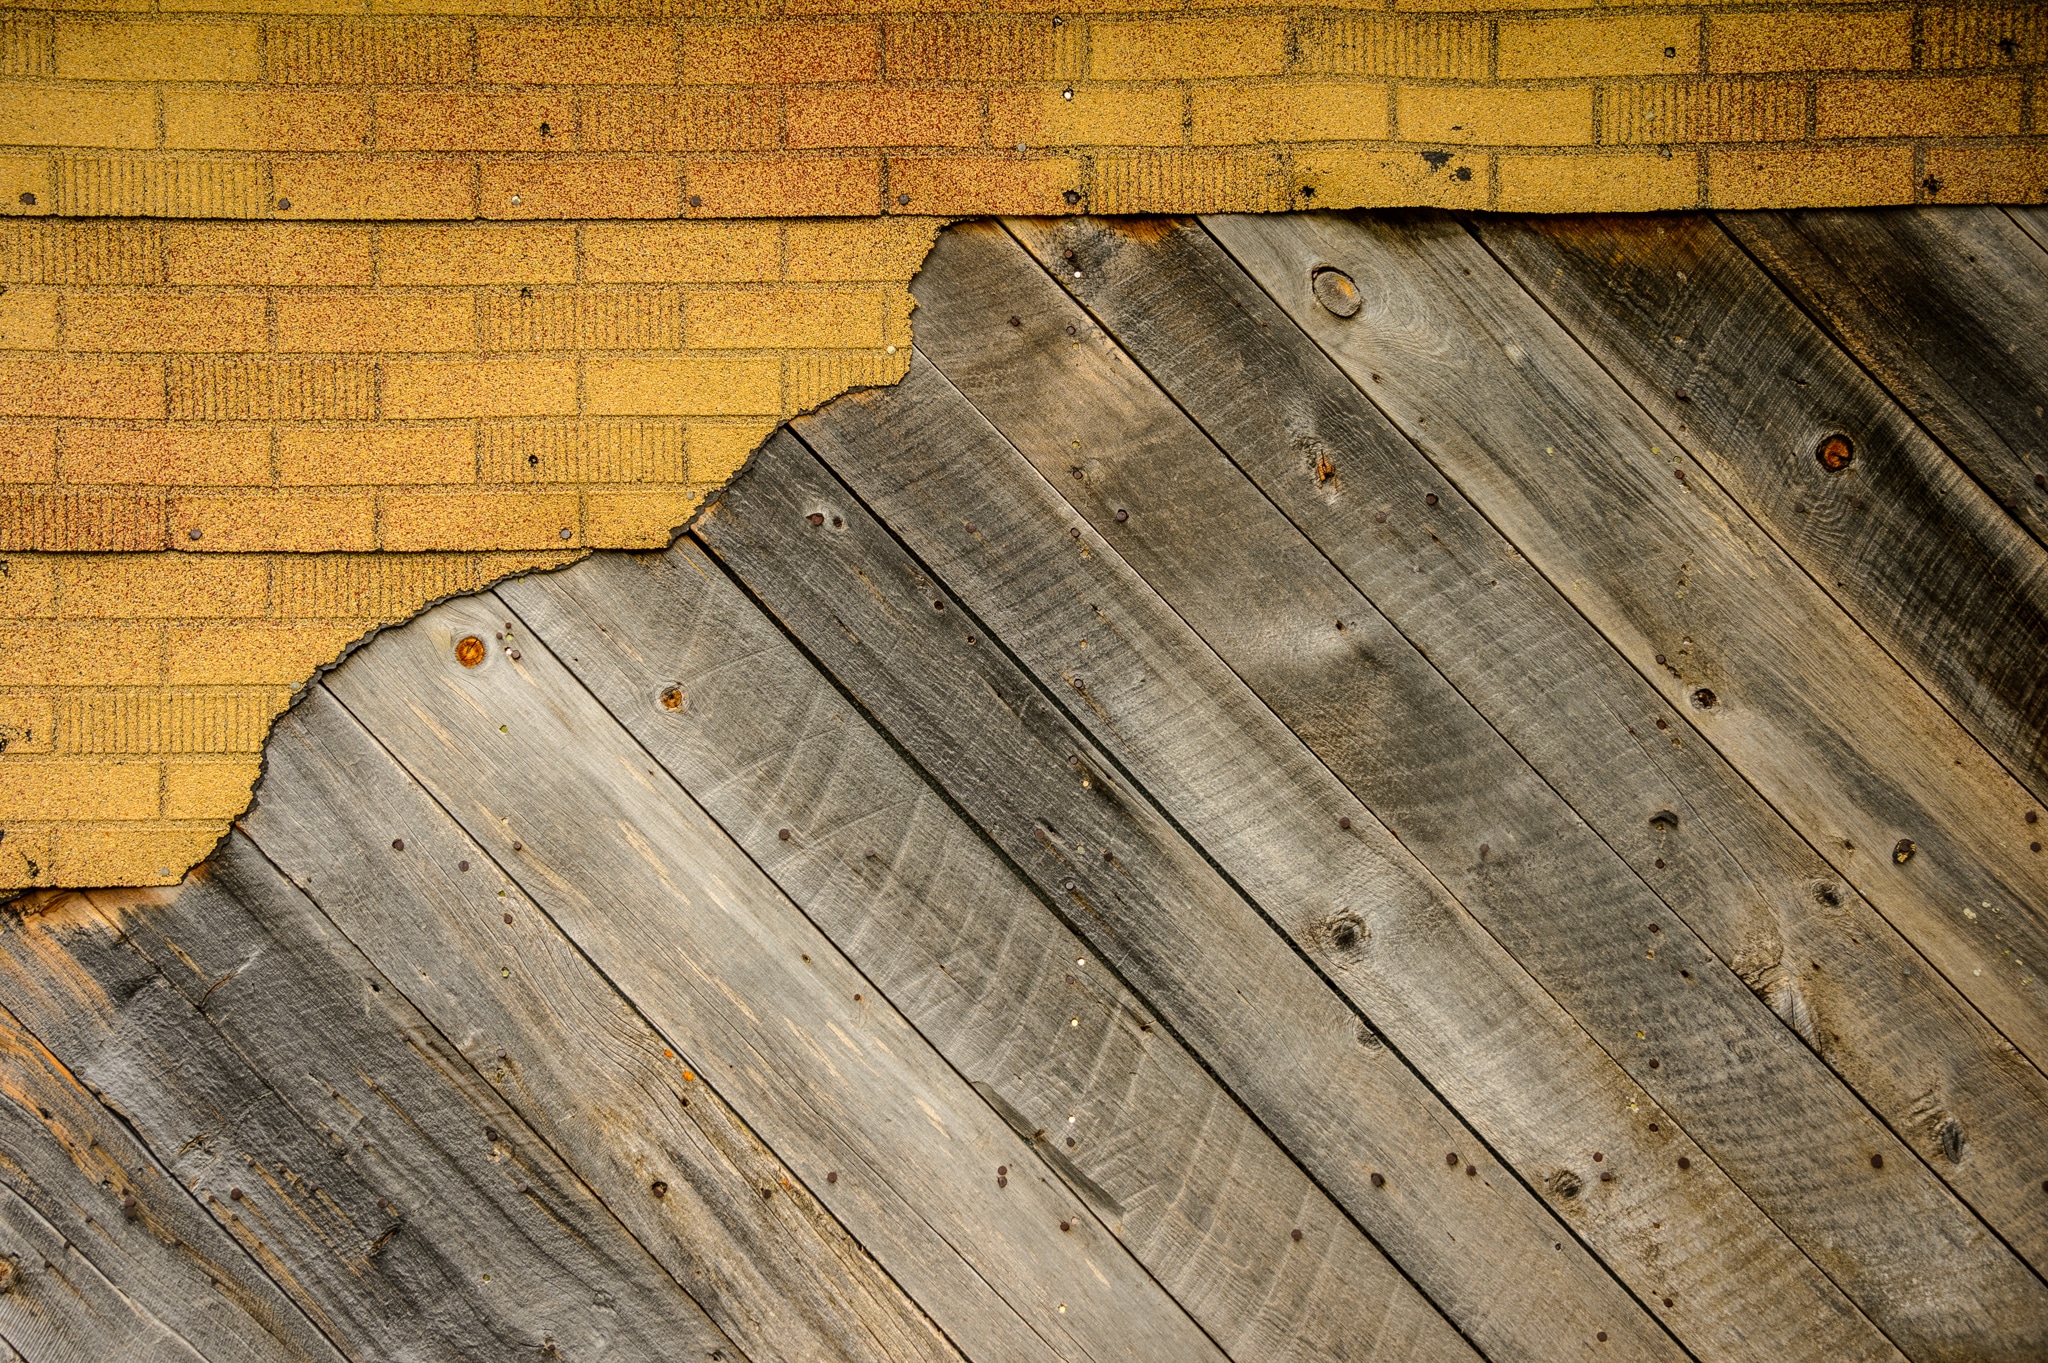 This is a close-up view of old wood and other materials covering the exterior of a structure located in the Animas Forks townsite, northest of Silverton, Colorado, on San Juan County Road 2 near the Alpine Loop.